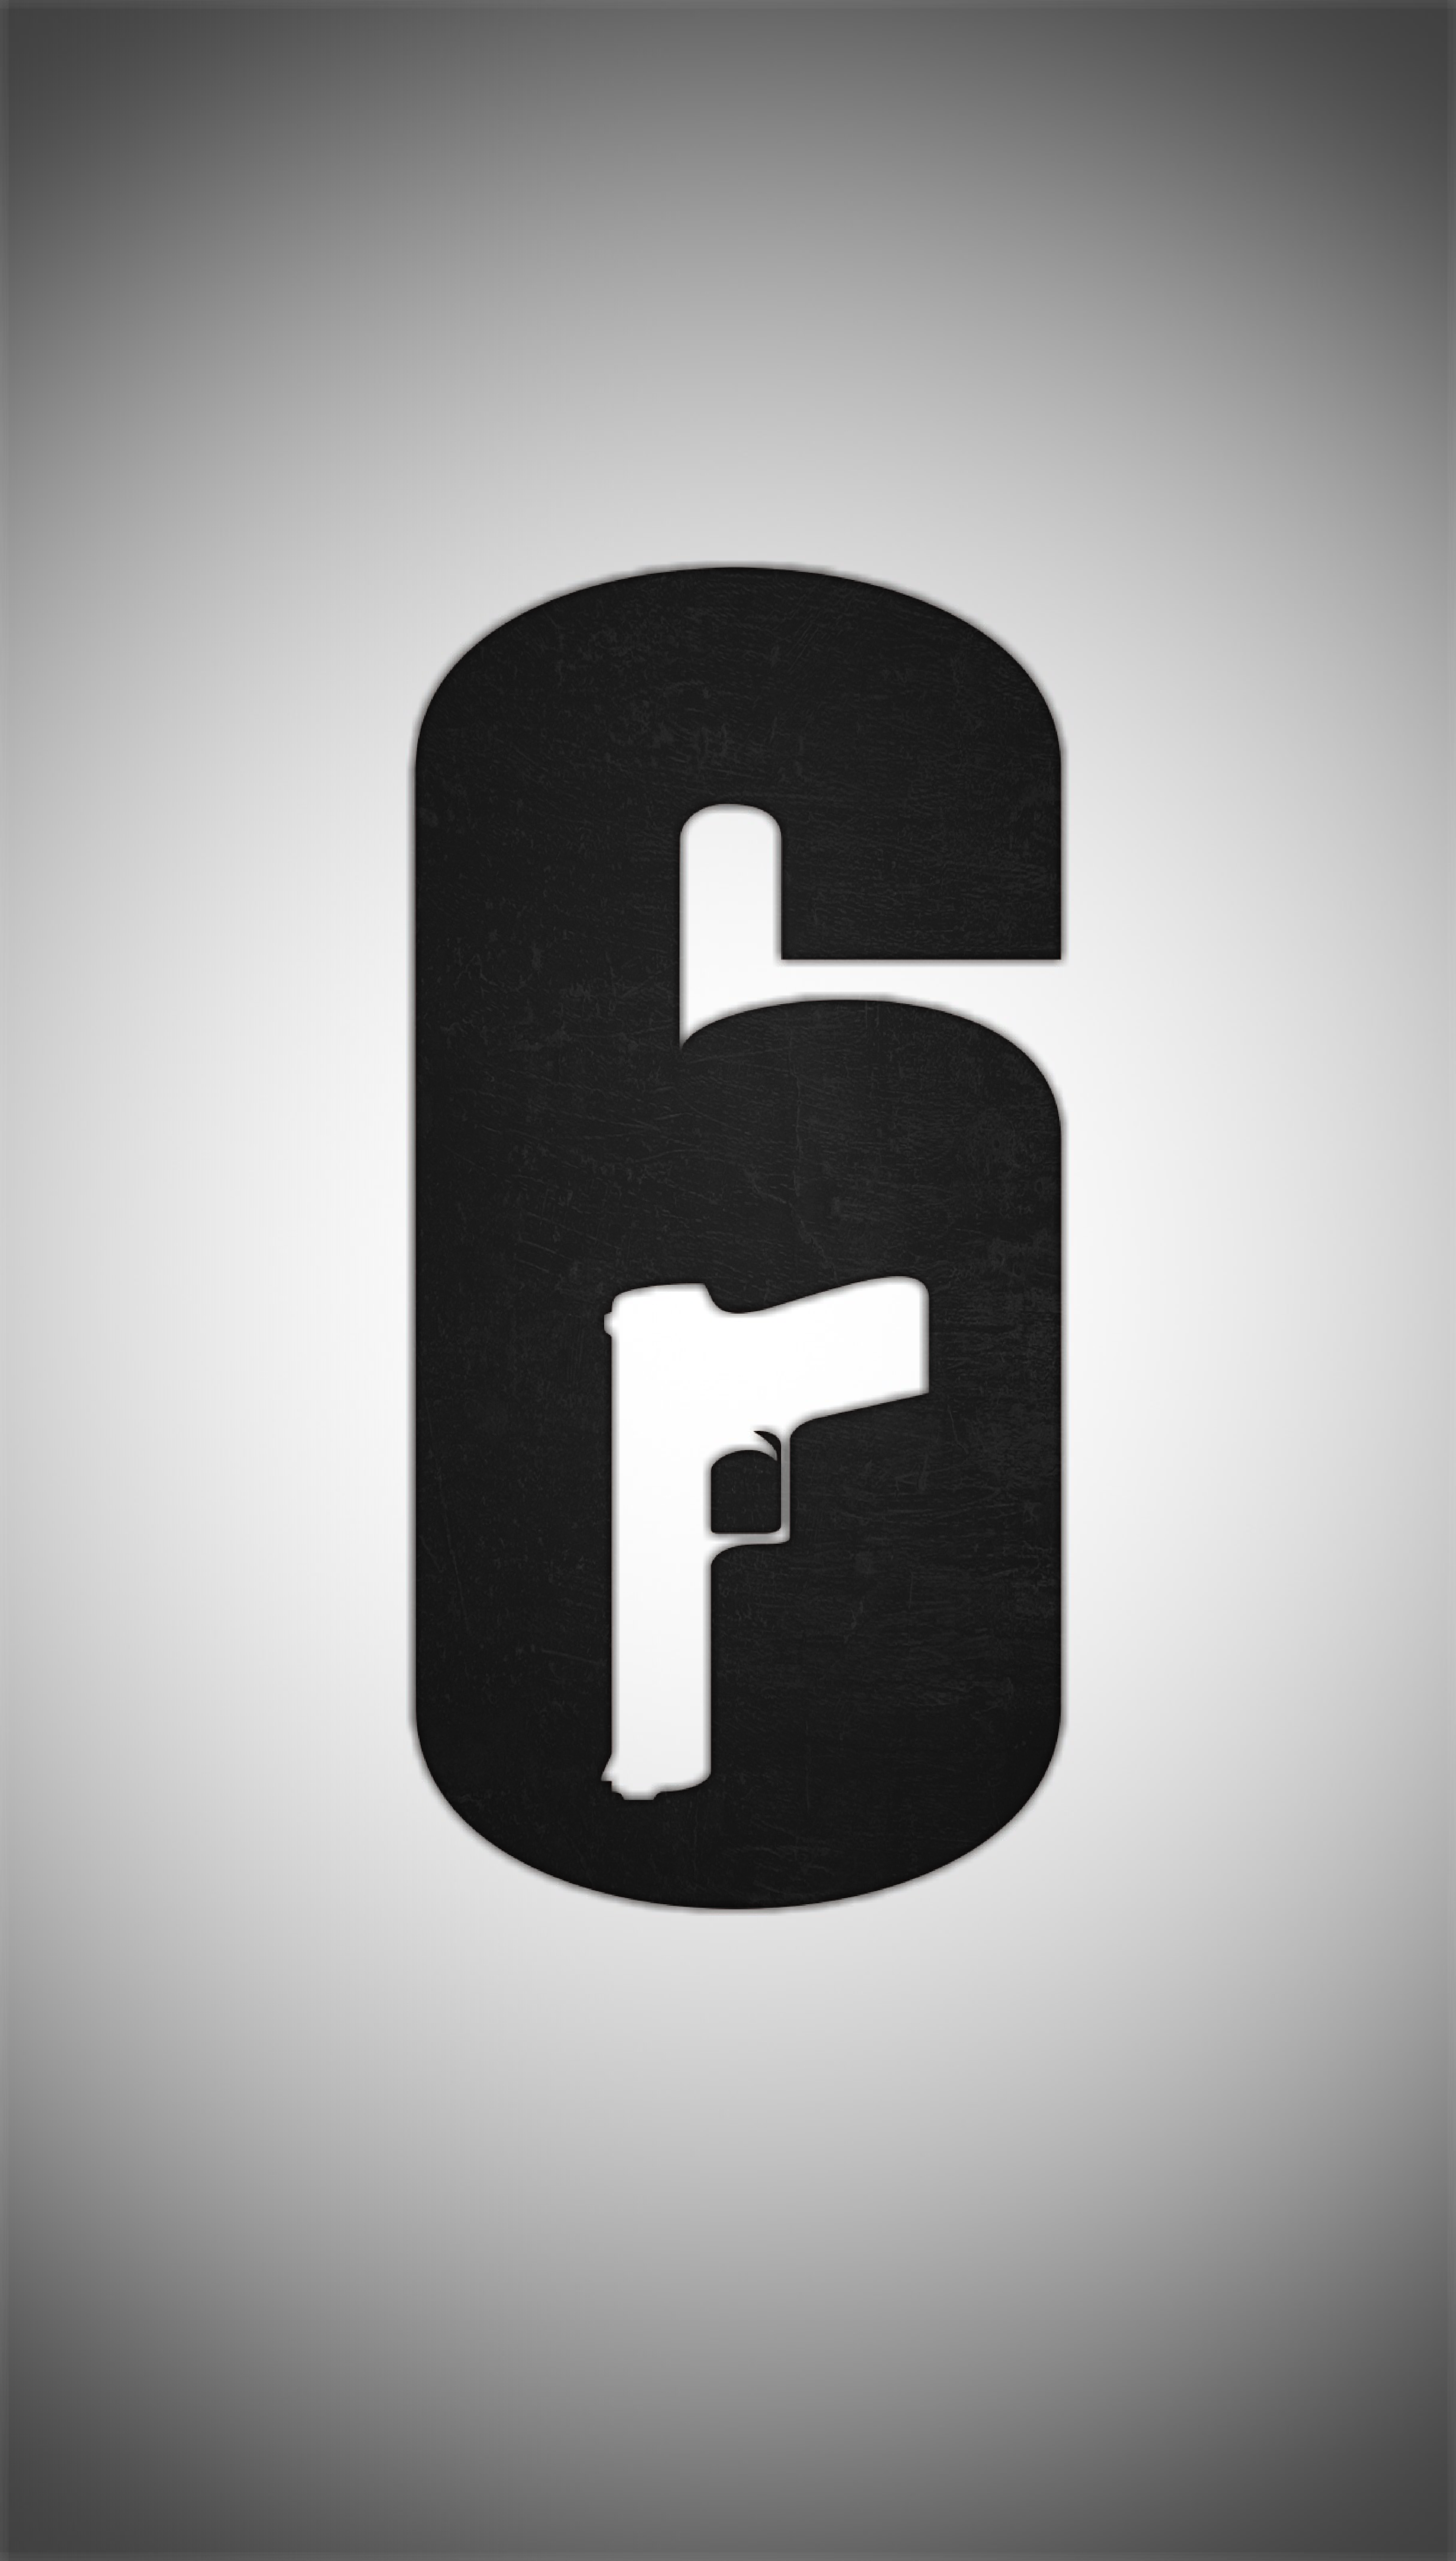 Rainbow Six: Siege Logo Mobile Wallpapers (Textures, Flags.